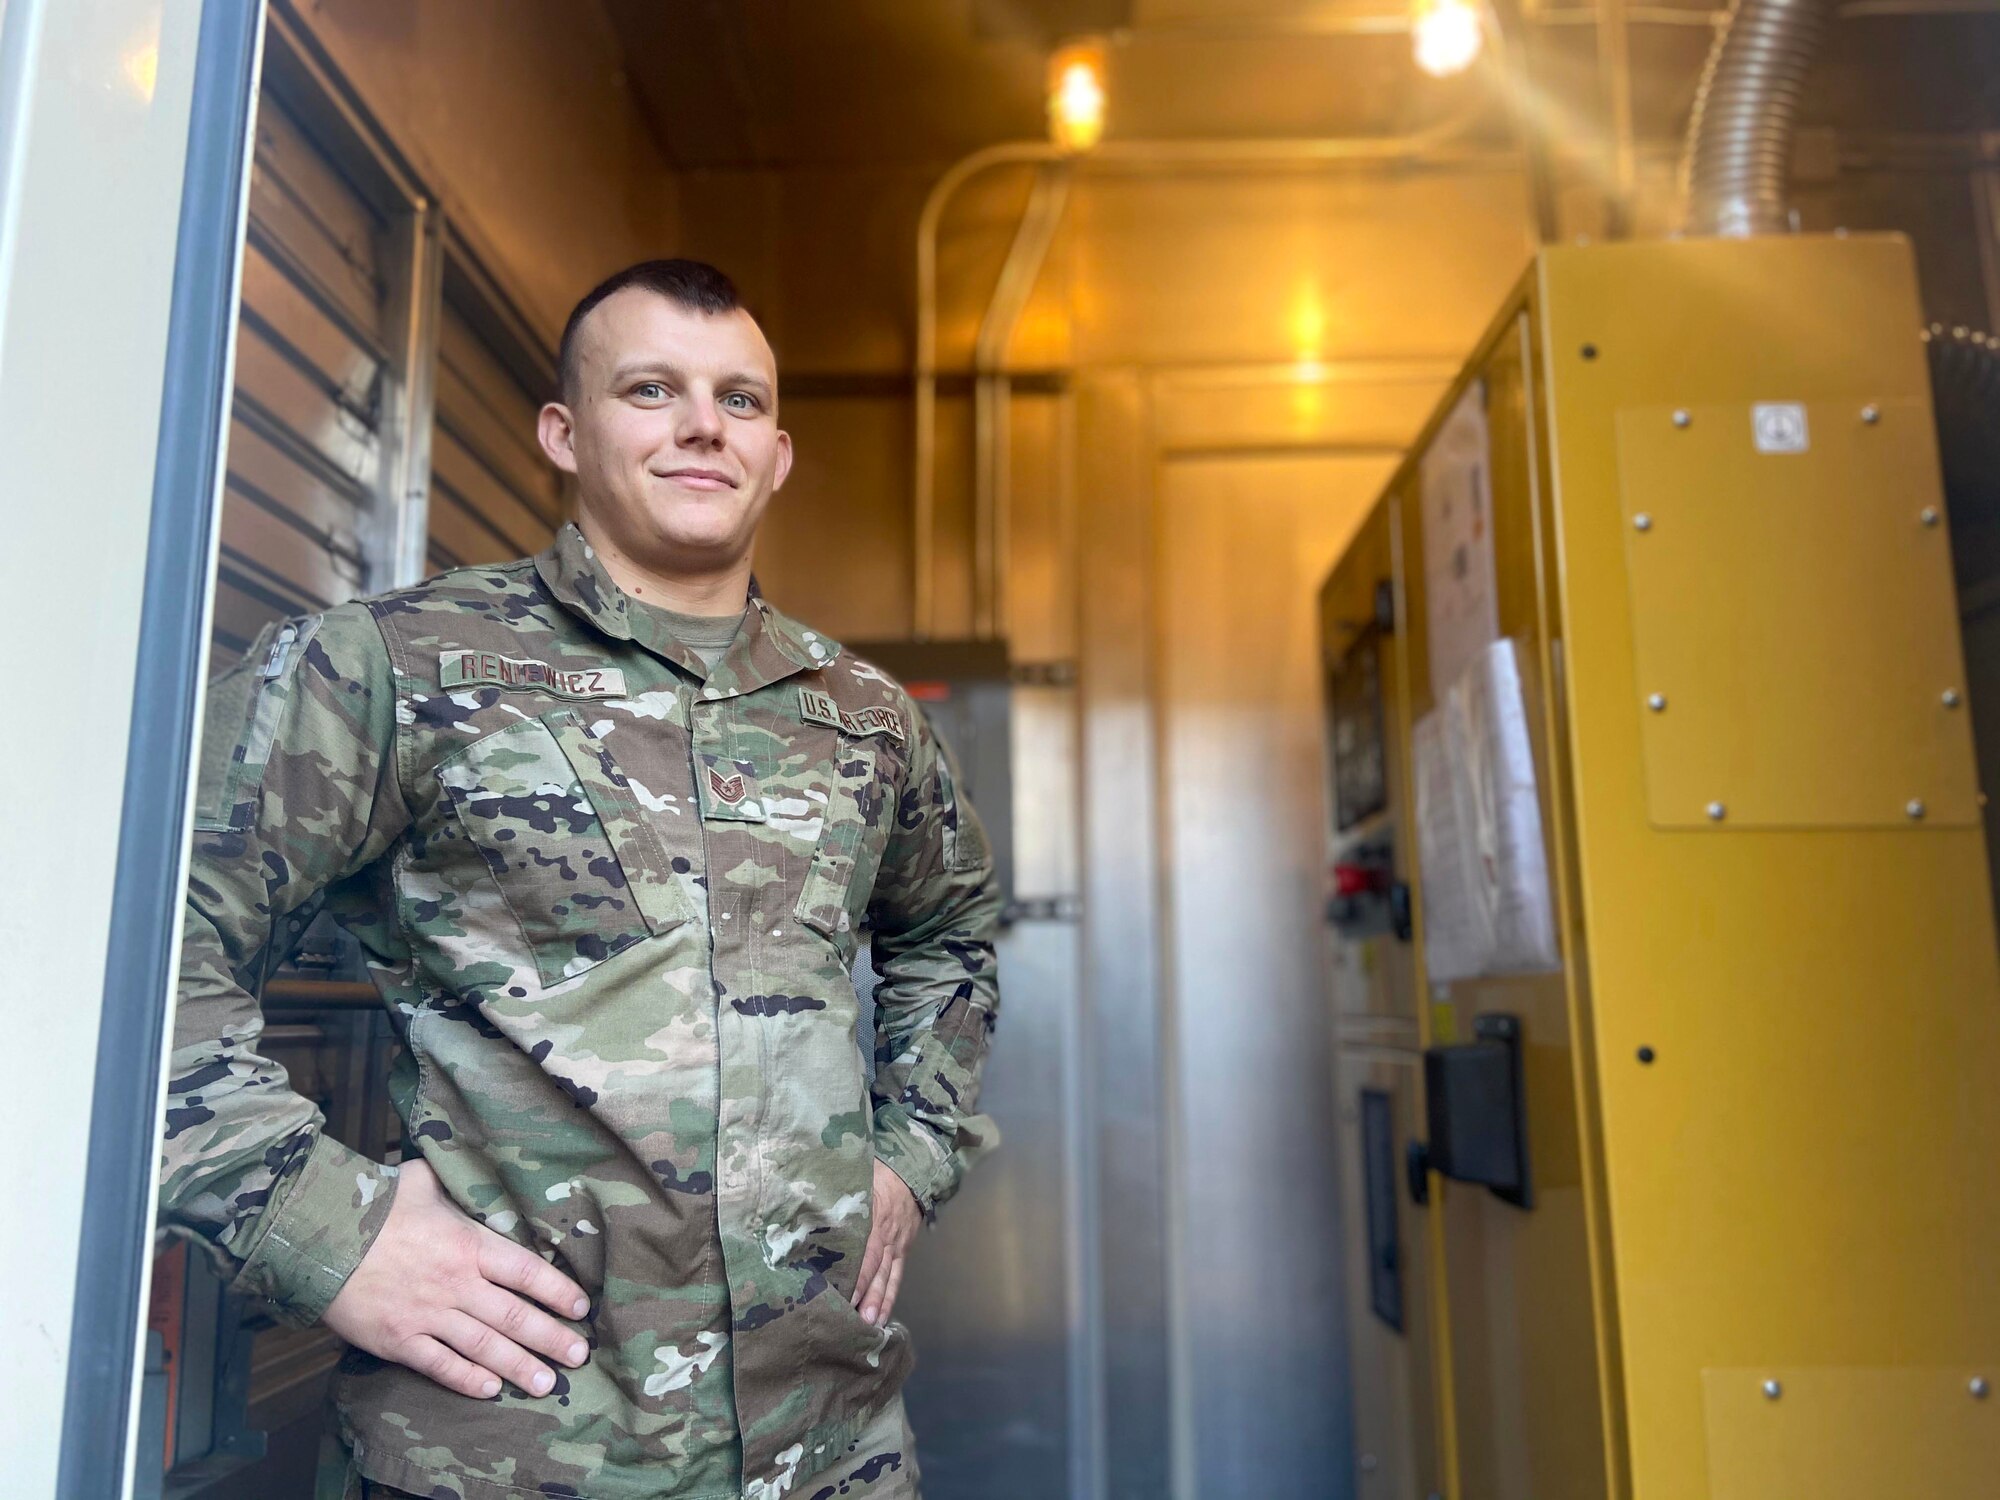 Tech. Sgt. Michael Reniewicz, 104th Fighter Wing power production shop leader, stands alongside base generators on December 10, 2020 at Barnes Air National Guard Base. The testing he is about to perform ensures power reliability in the event of a commercial loss of power. (U.S. Air National Guard Photo by Airman 1st Class Camille Lienau)